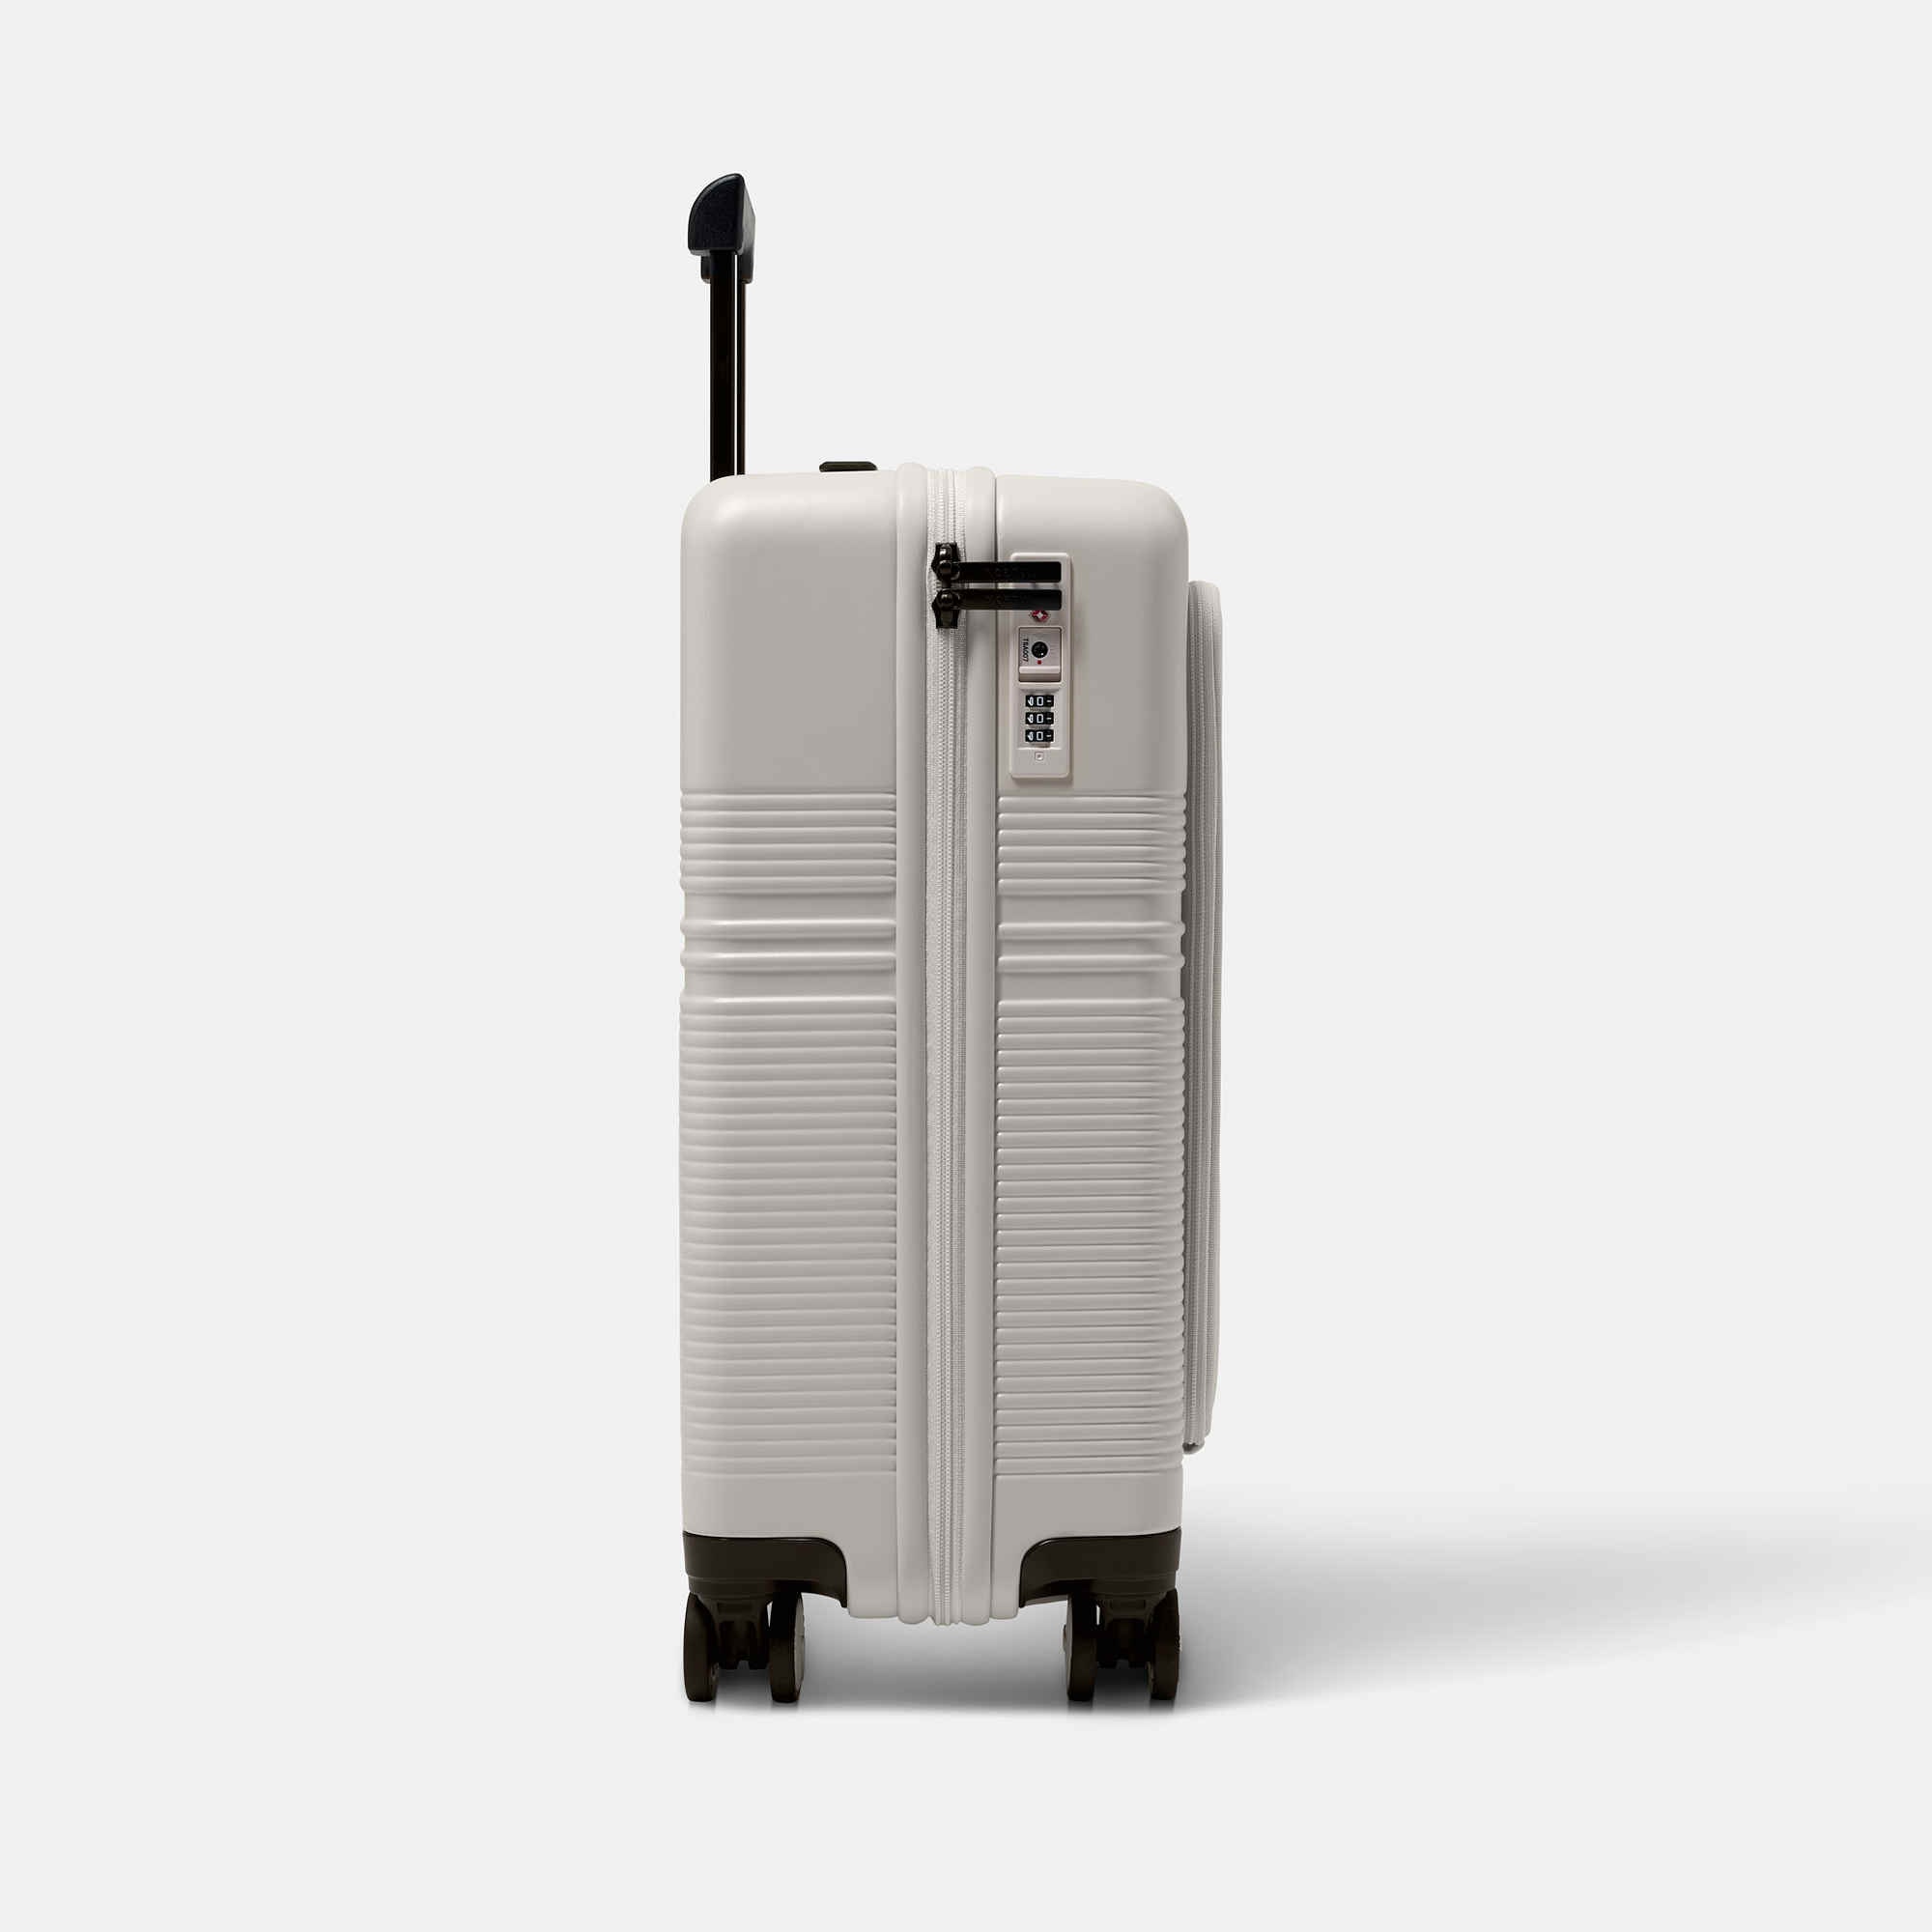 NORTVI sustainable design white suitcase with laptop compartment made of durable material. Perfect travel trolley to use as hand luggage.